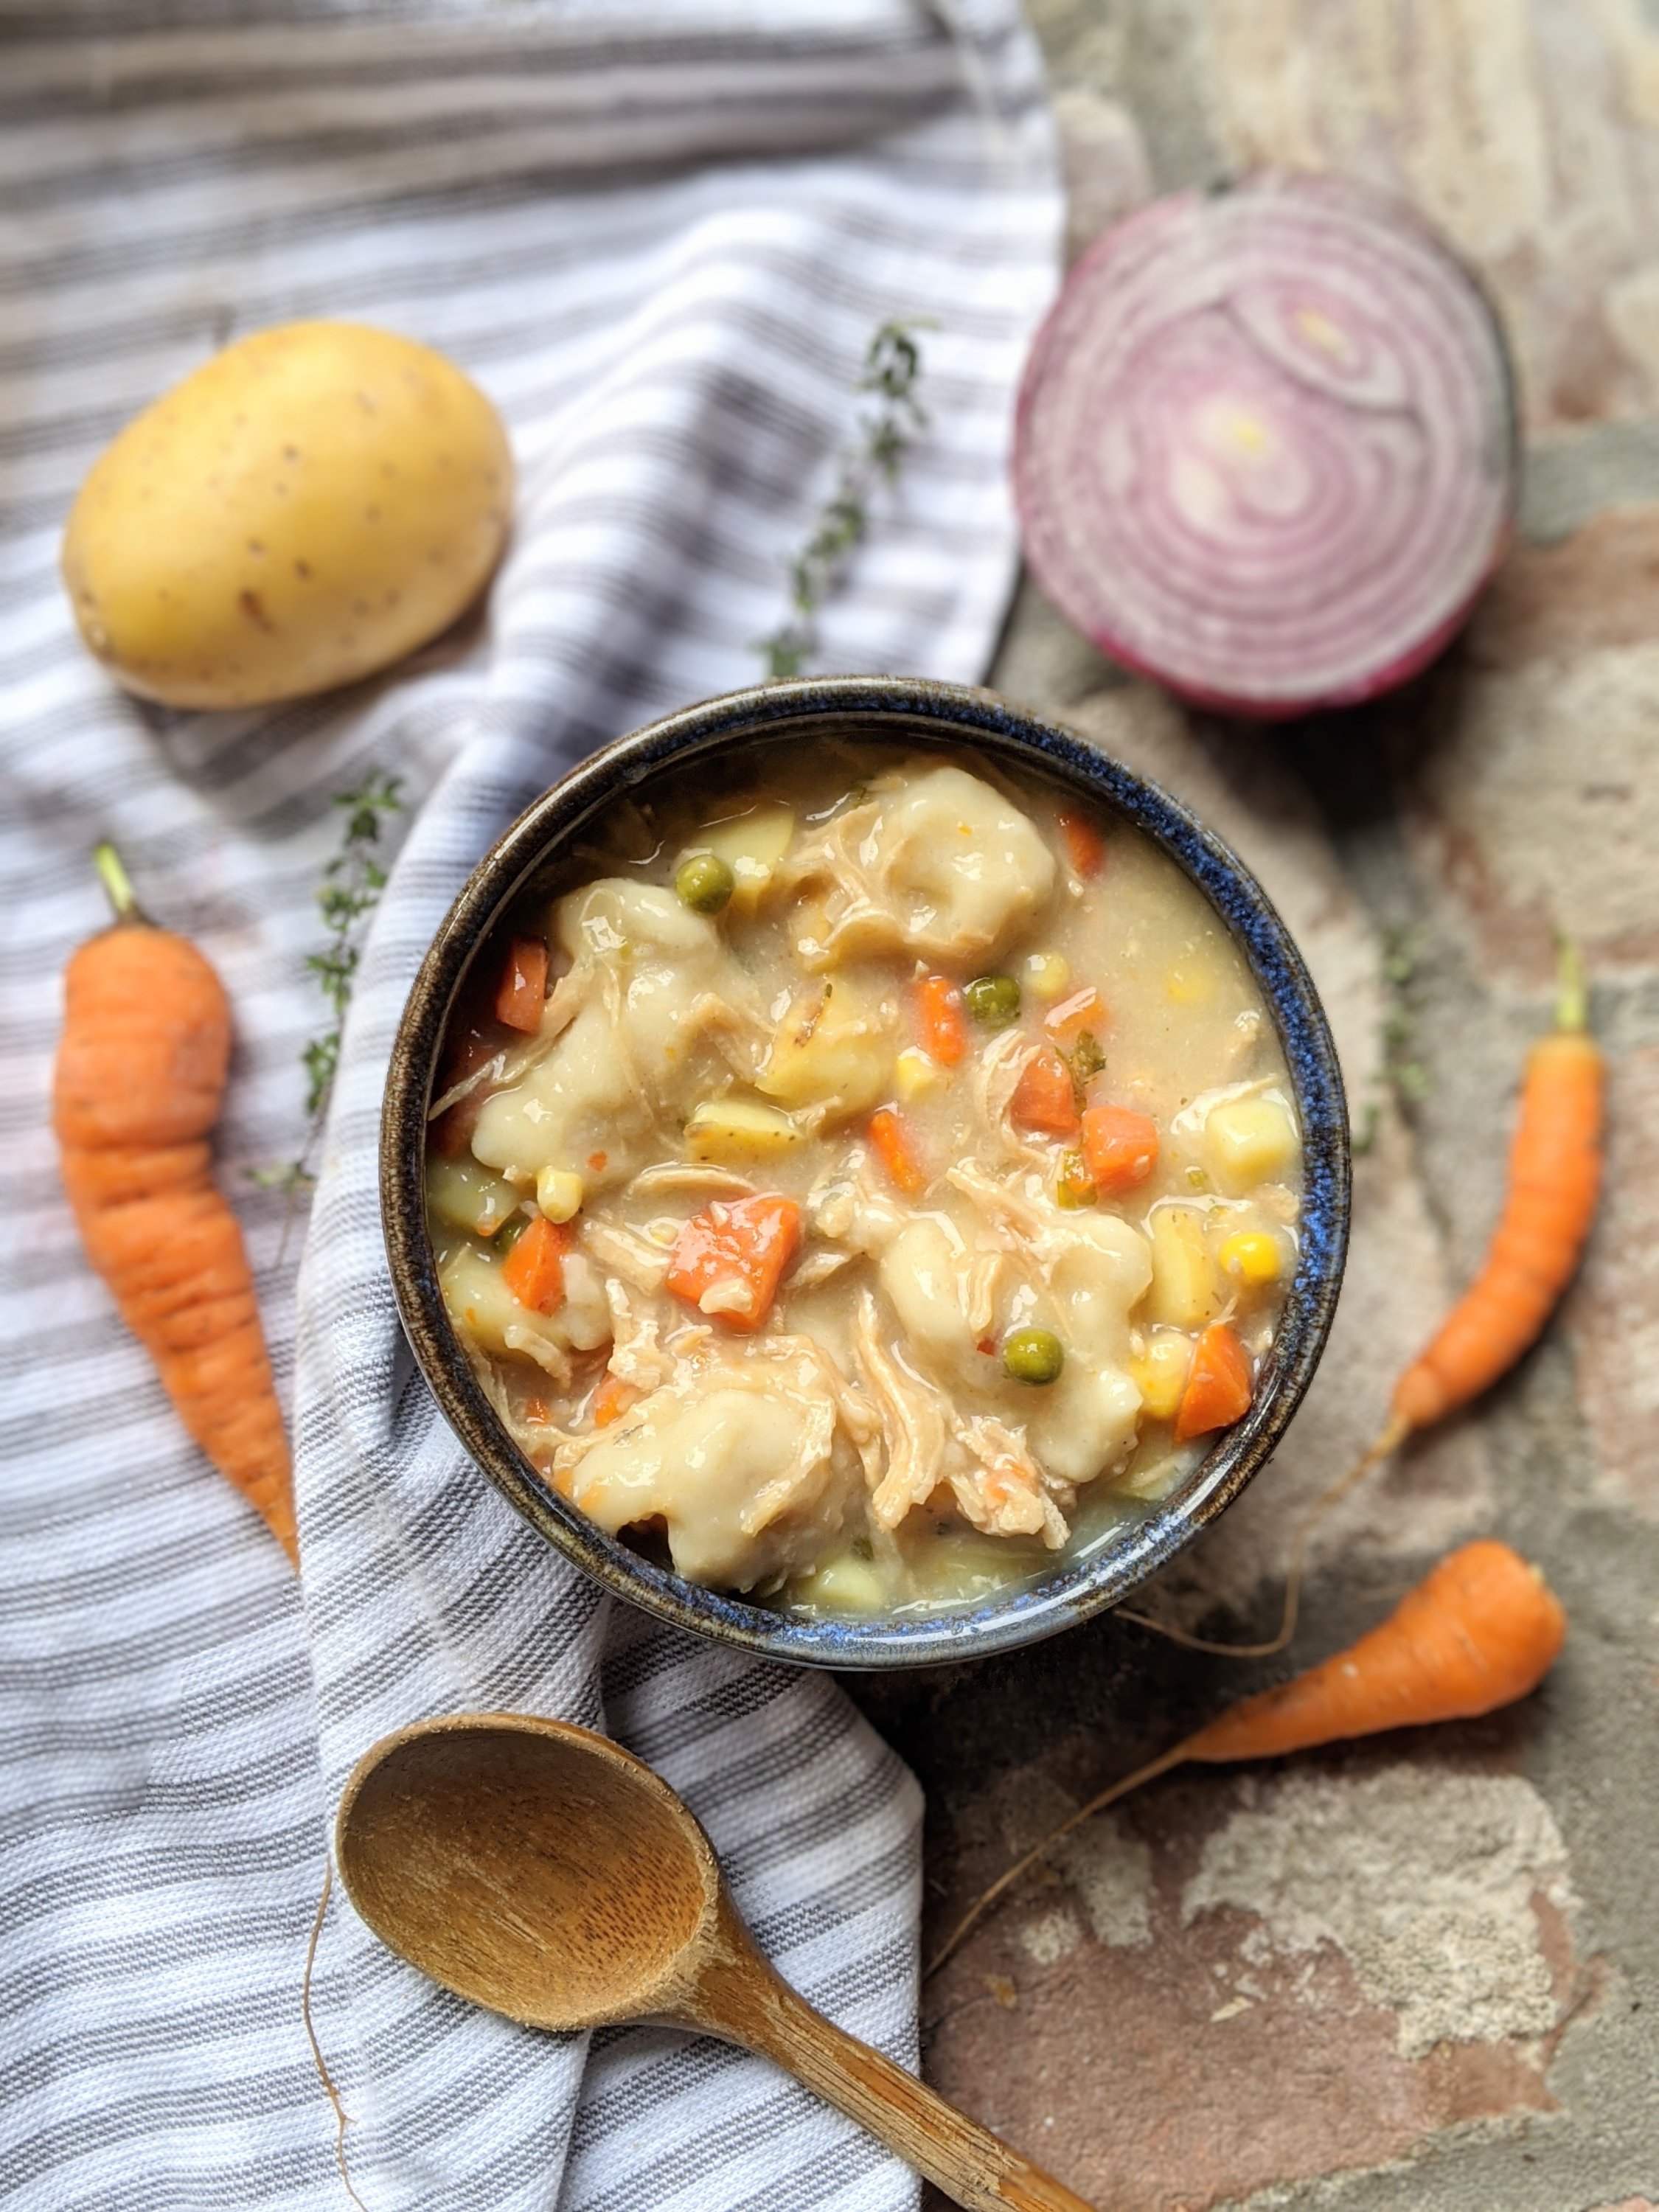 easy chicken and dumplings soup recipe dairy free gluten free option healthy homemade make ahead meals for company family will love